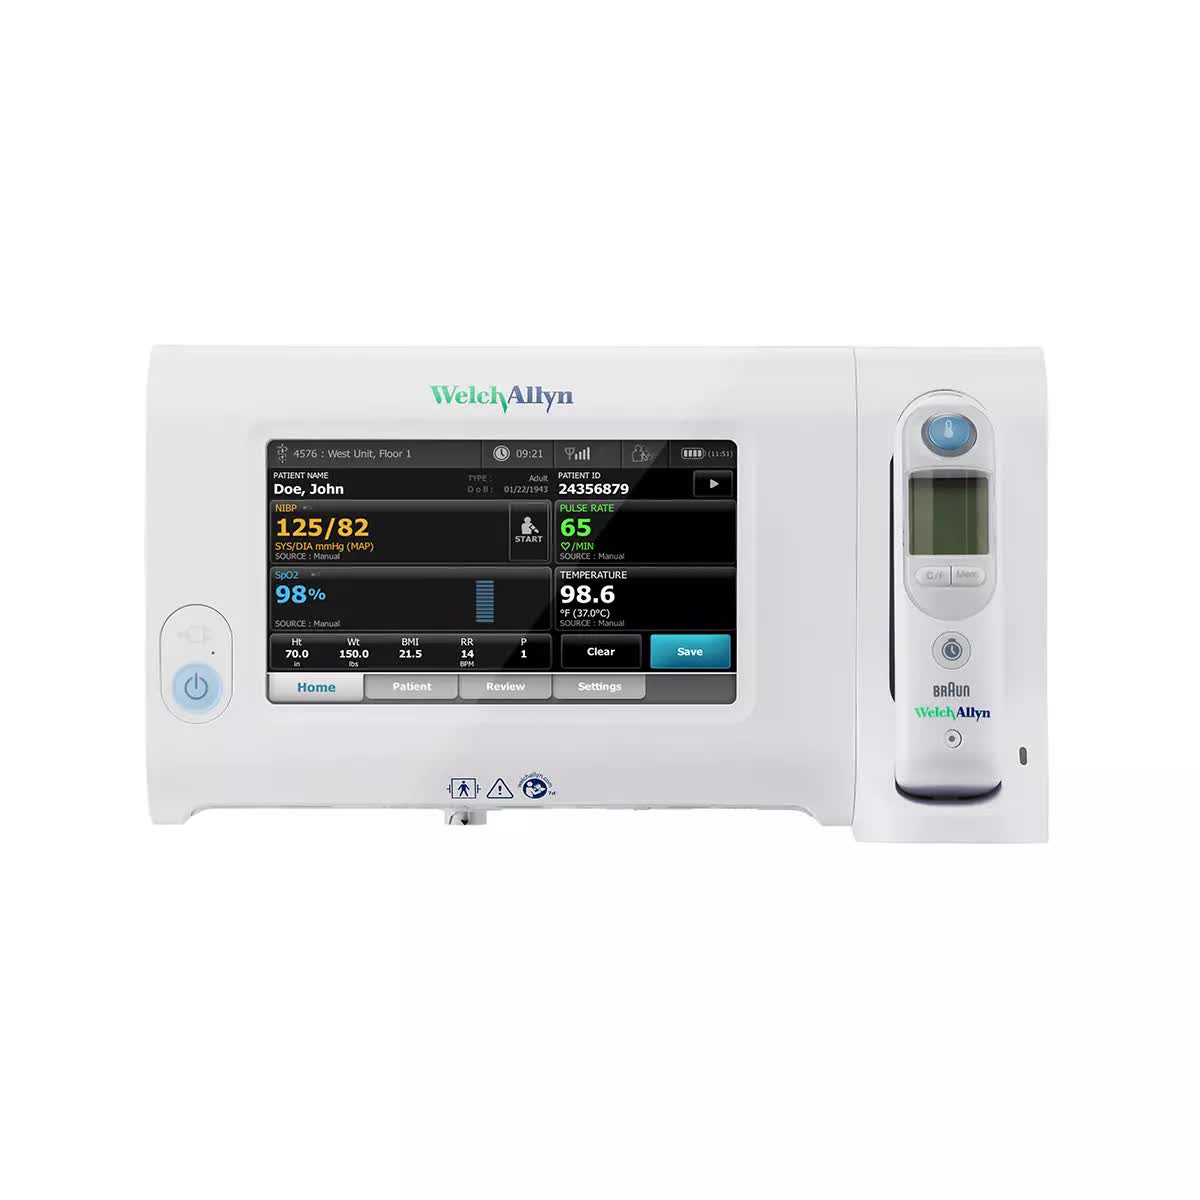 Welch Allyn Connex 7300 Bluetooth Connectivity Spot Monitor with Nonin SpO2 and Braun Pro6000